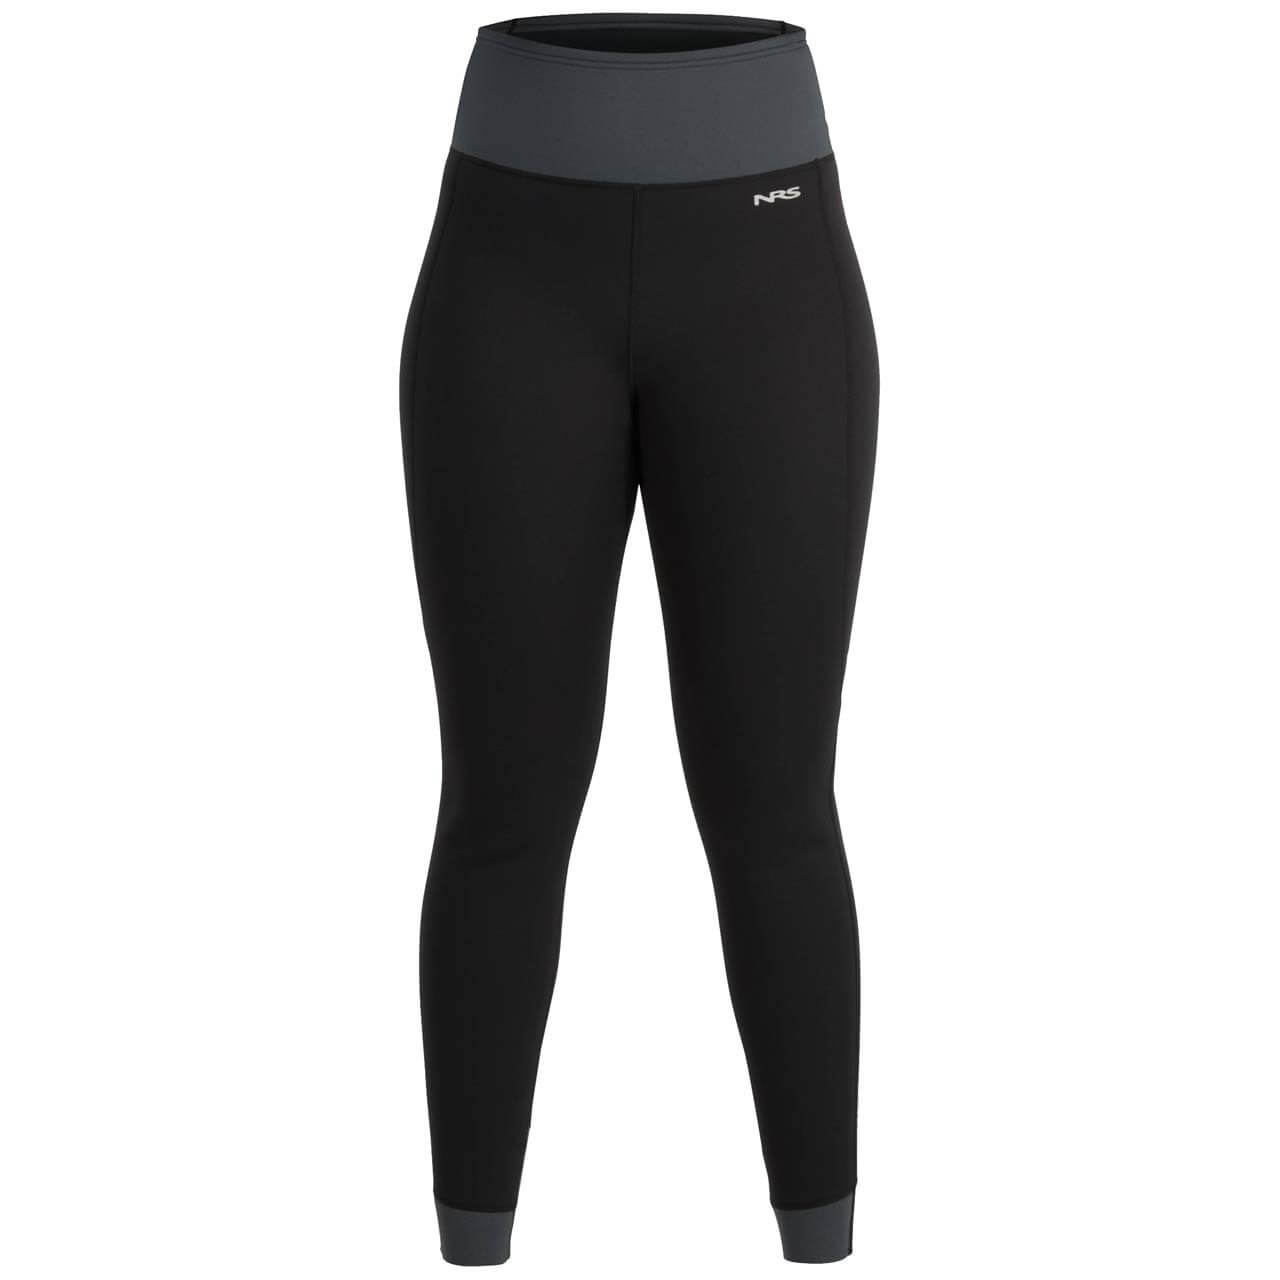 NRS Ignitor Pant Women